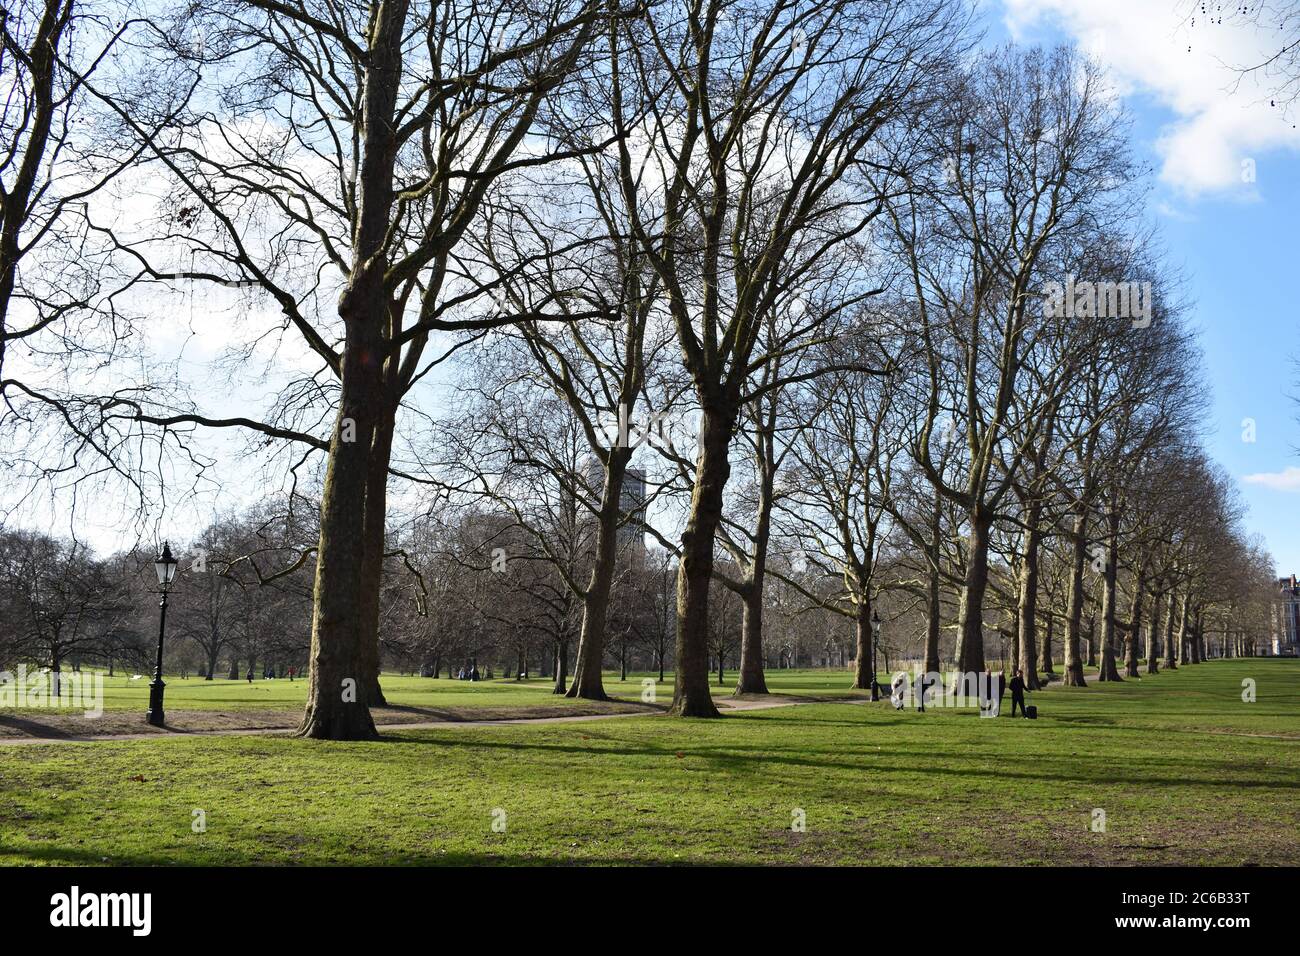 Leafless trees in a line in Green Park, London  Royal Parks Of London. A few people stroll along the grass and there is a singular old fashioned lamp. Stock Photo